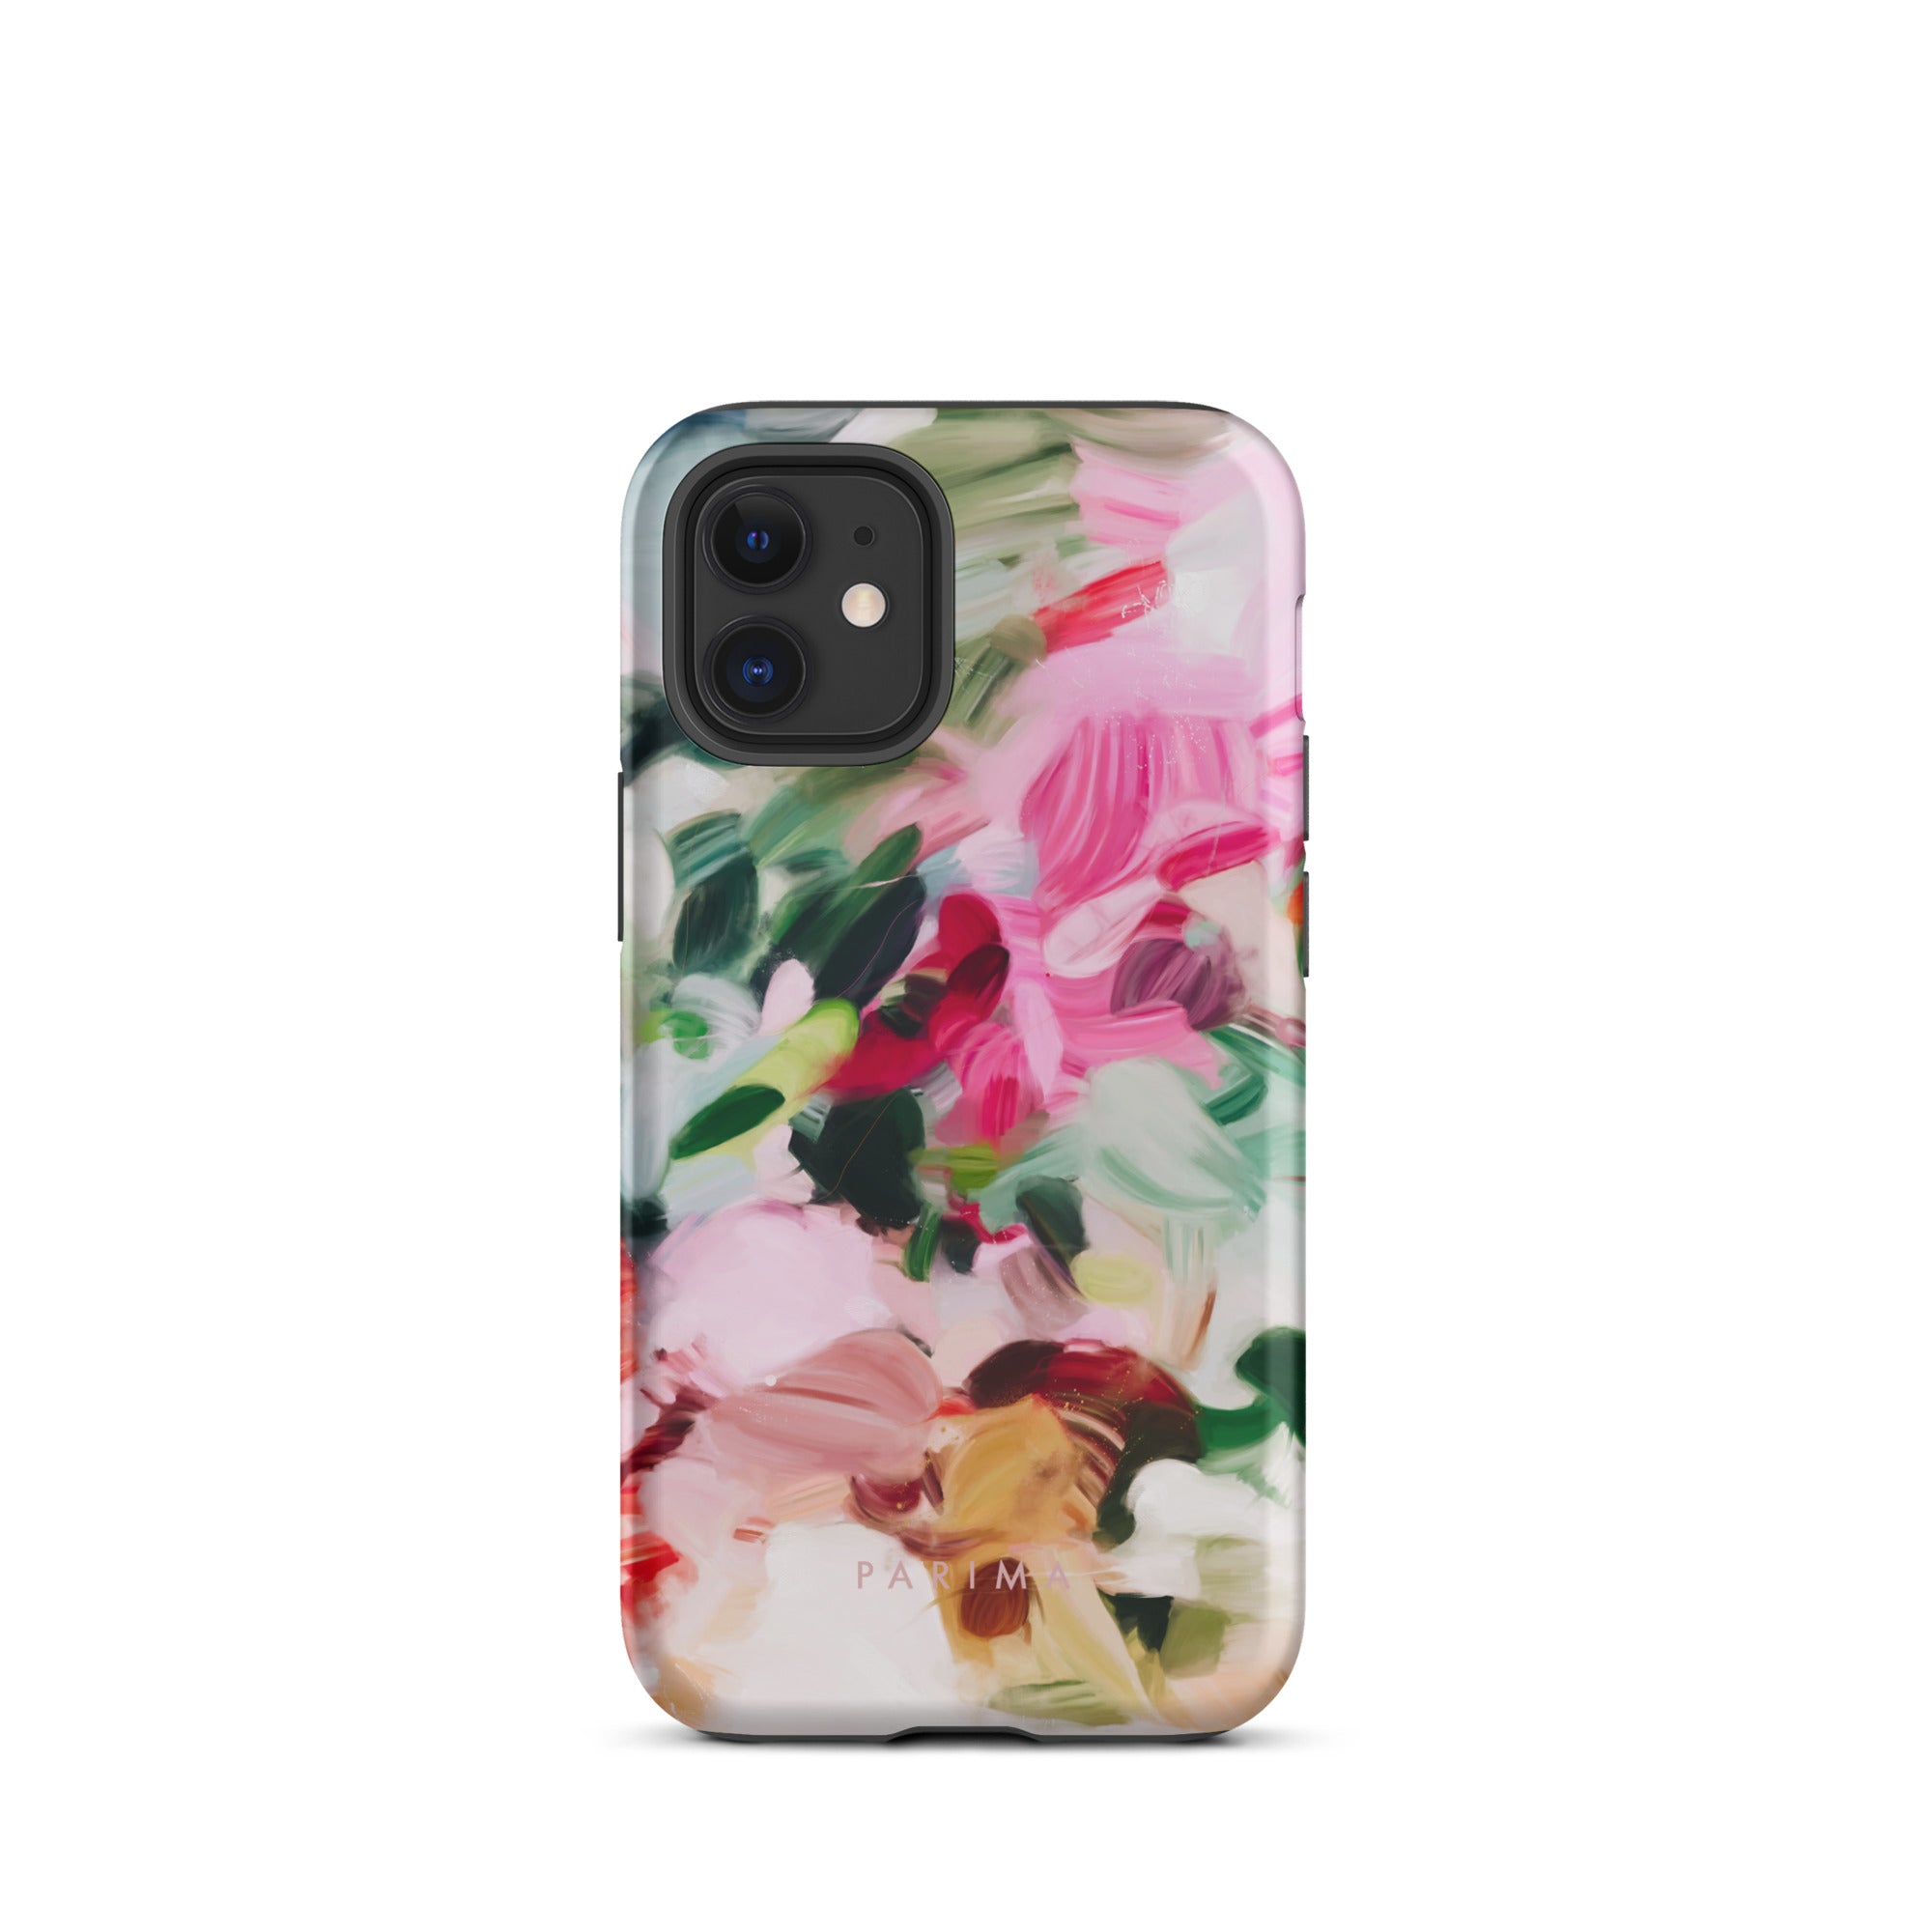 Bloom, pink and green abstract art - iPhone 12 Mini tough case by Parima Studio